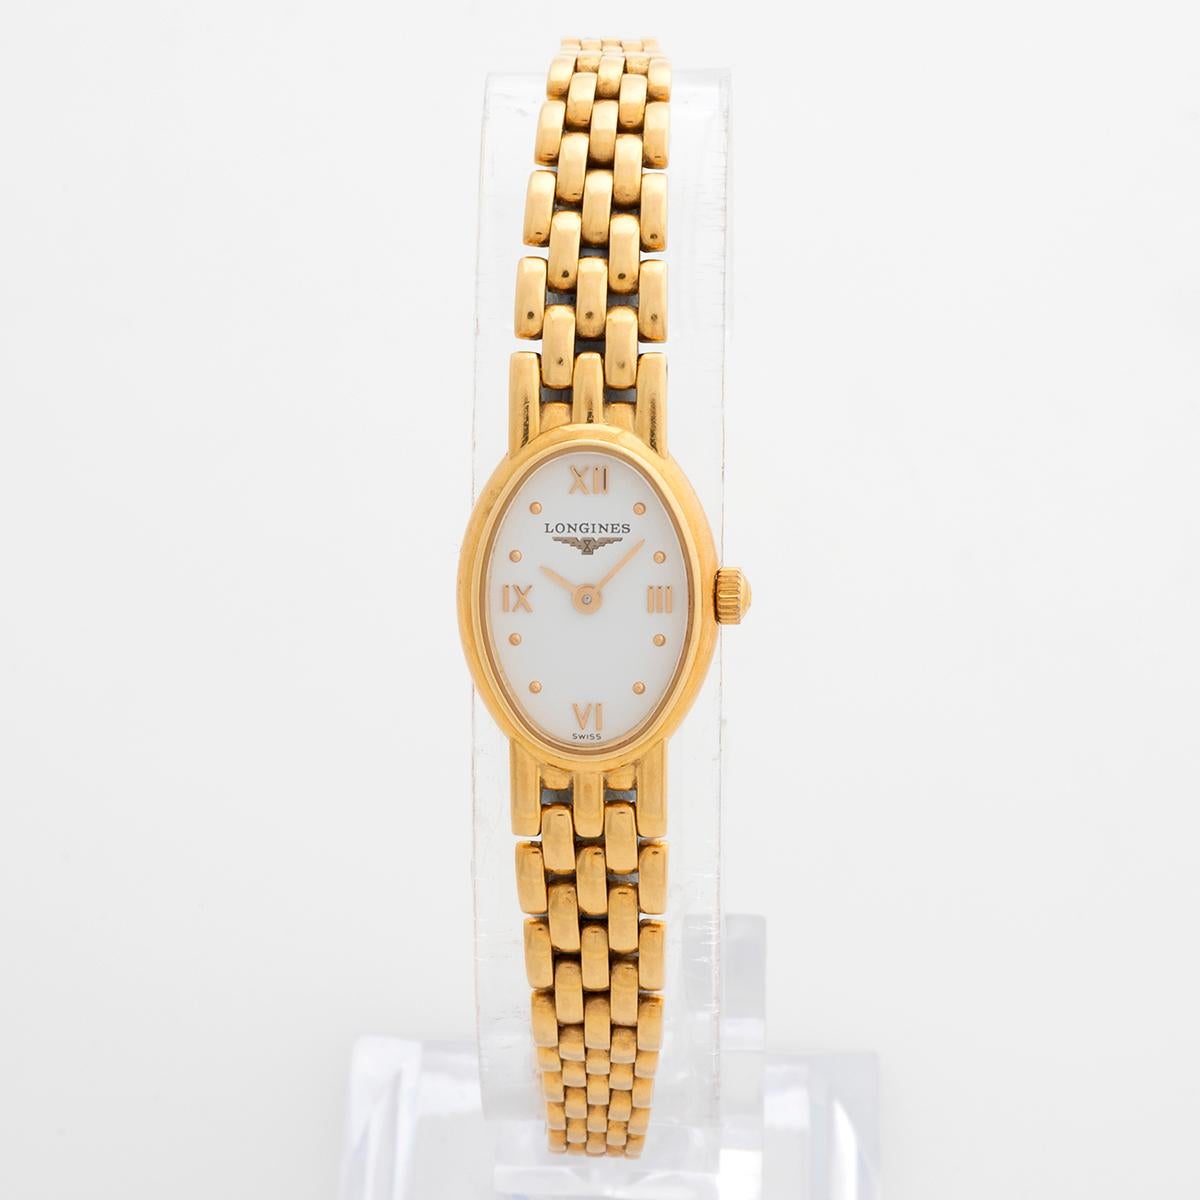 Our rare and attractive quartz Longines lady Prestige reference L6.109.6.15.6 features an 18k yellow gold oval 20mm case with white dial and 18k yellow gold bracelet with the clasp also hallmarked. We date this Longines to circa 2010. A wonderful